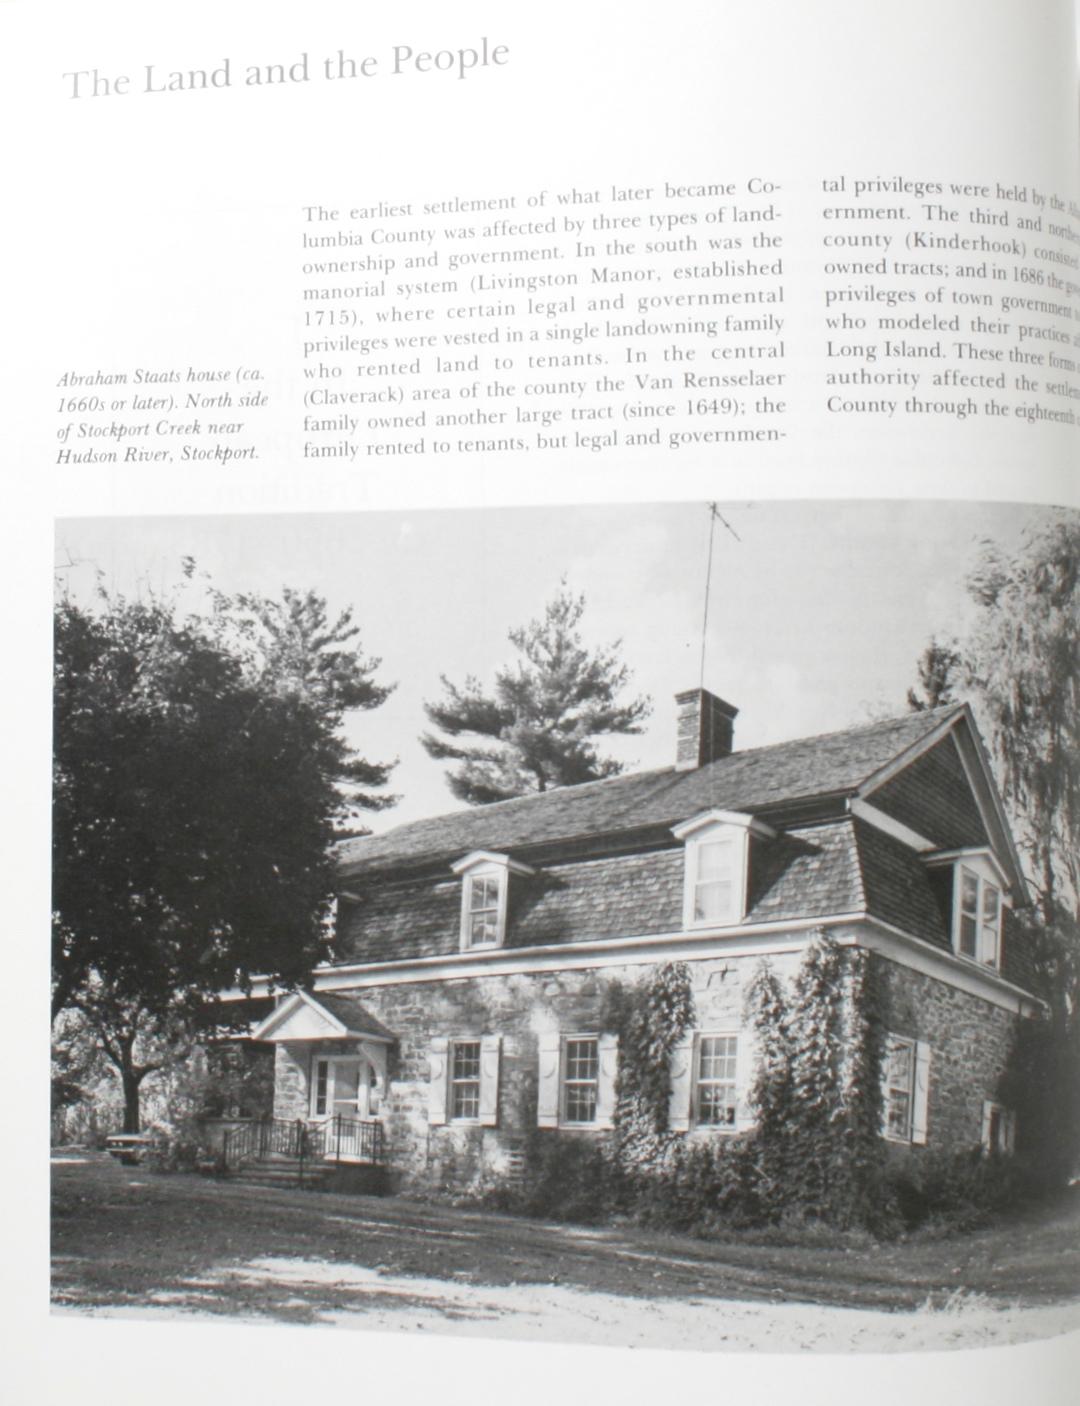 American Visible Heritage-Columbia County NY, a History in Art and Architectucture, 1st